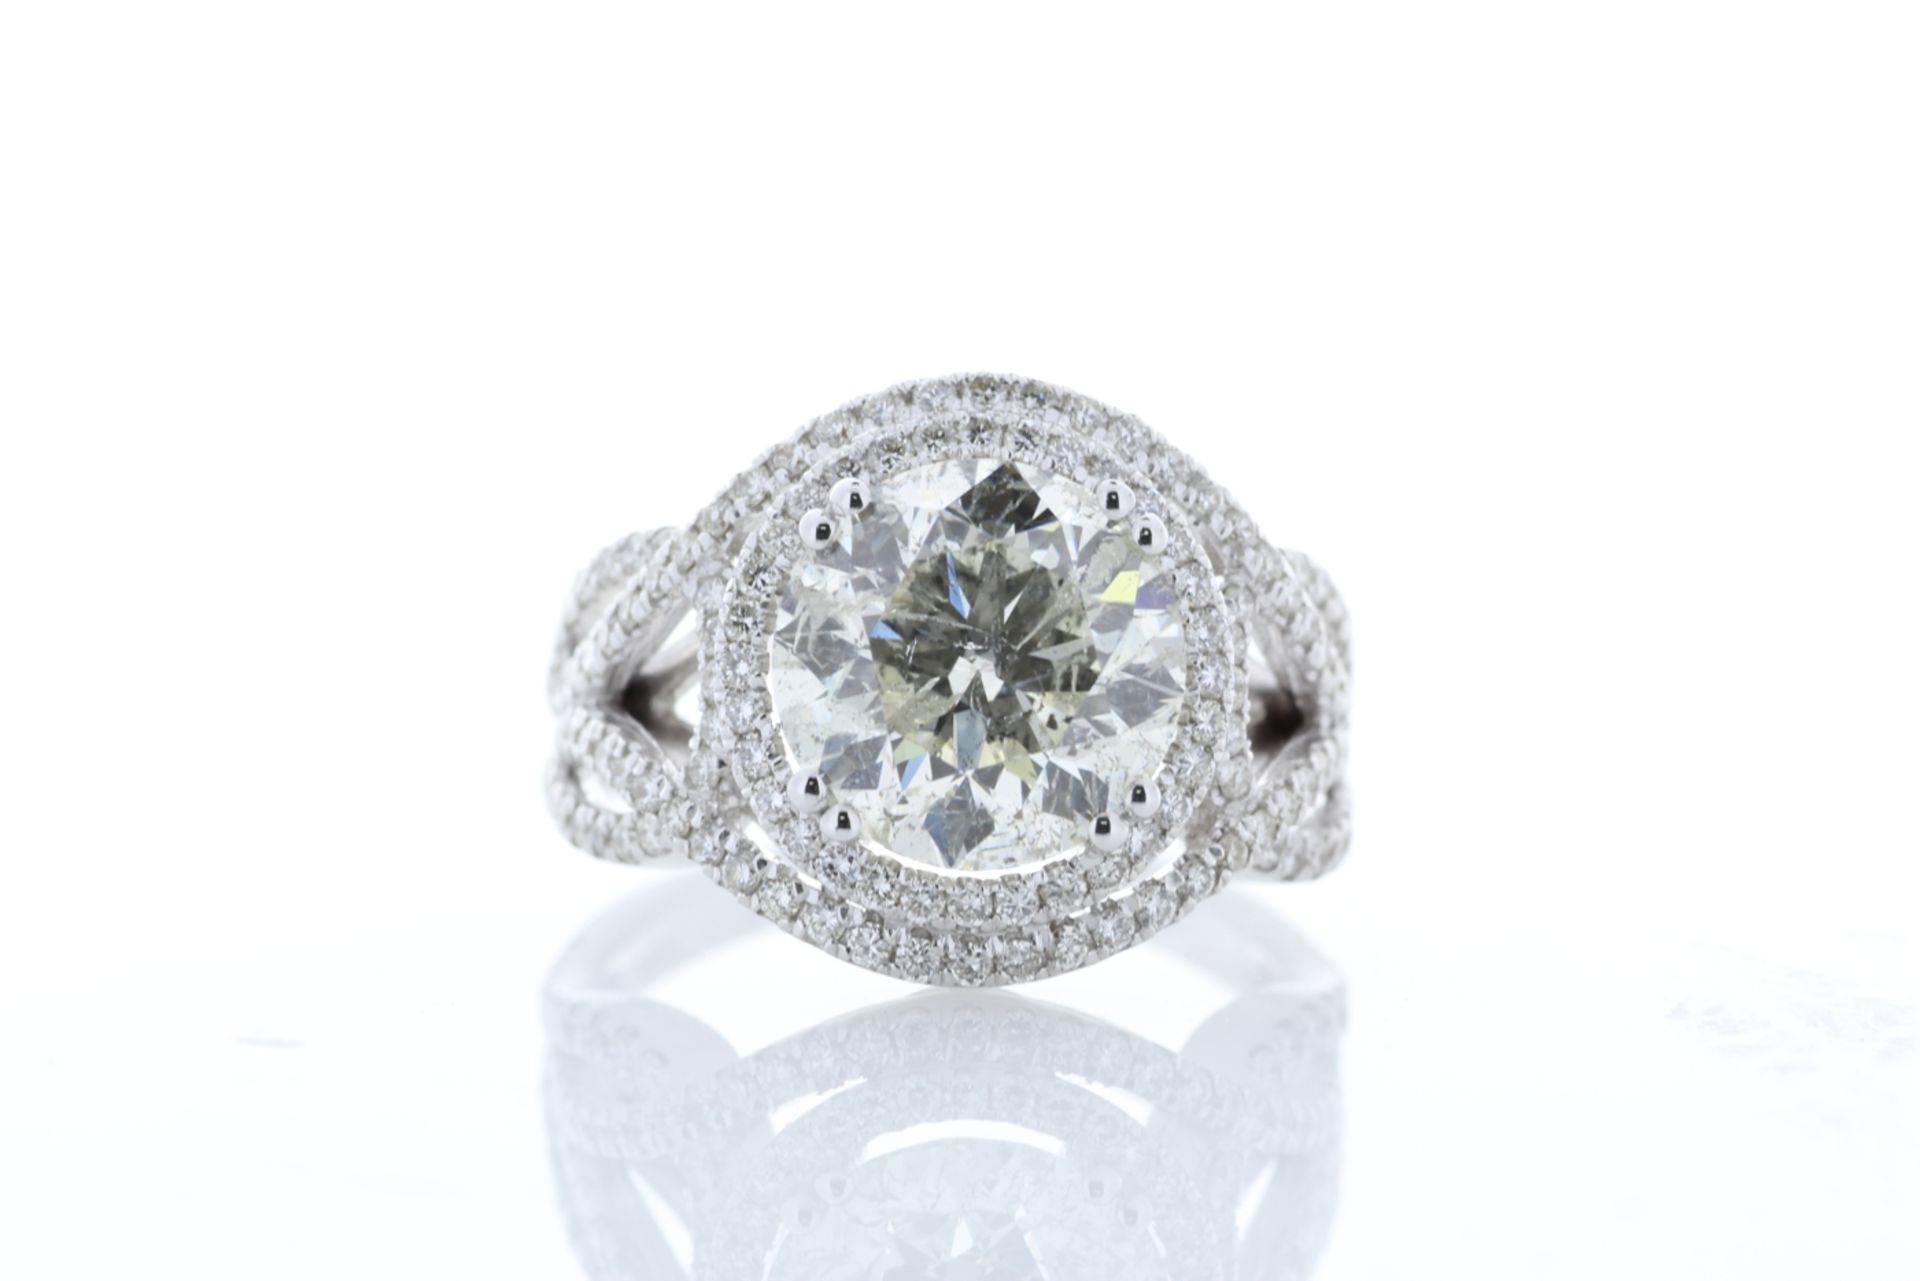 18ct White Gold Single Stone With Halo Setting Ring 5.17 Carats - Valued by IDI £76,000.00 - 18ct - Image 2 of 5